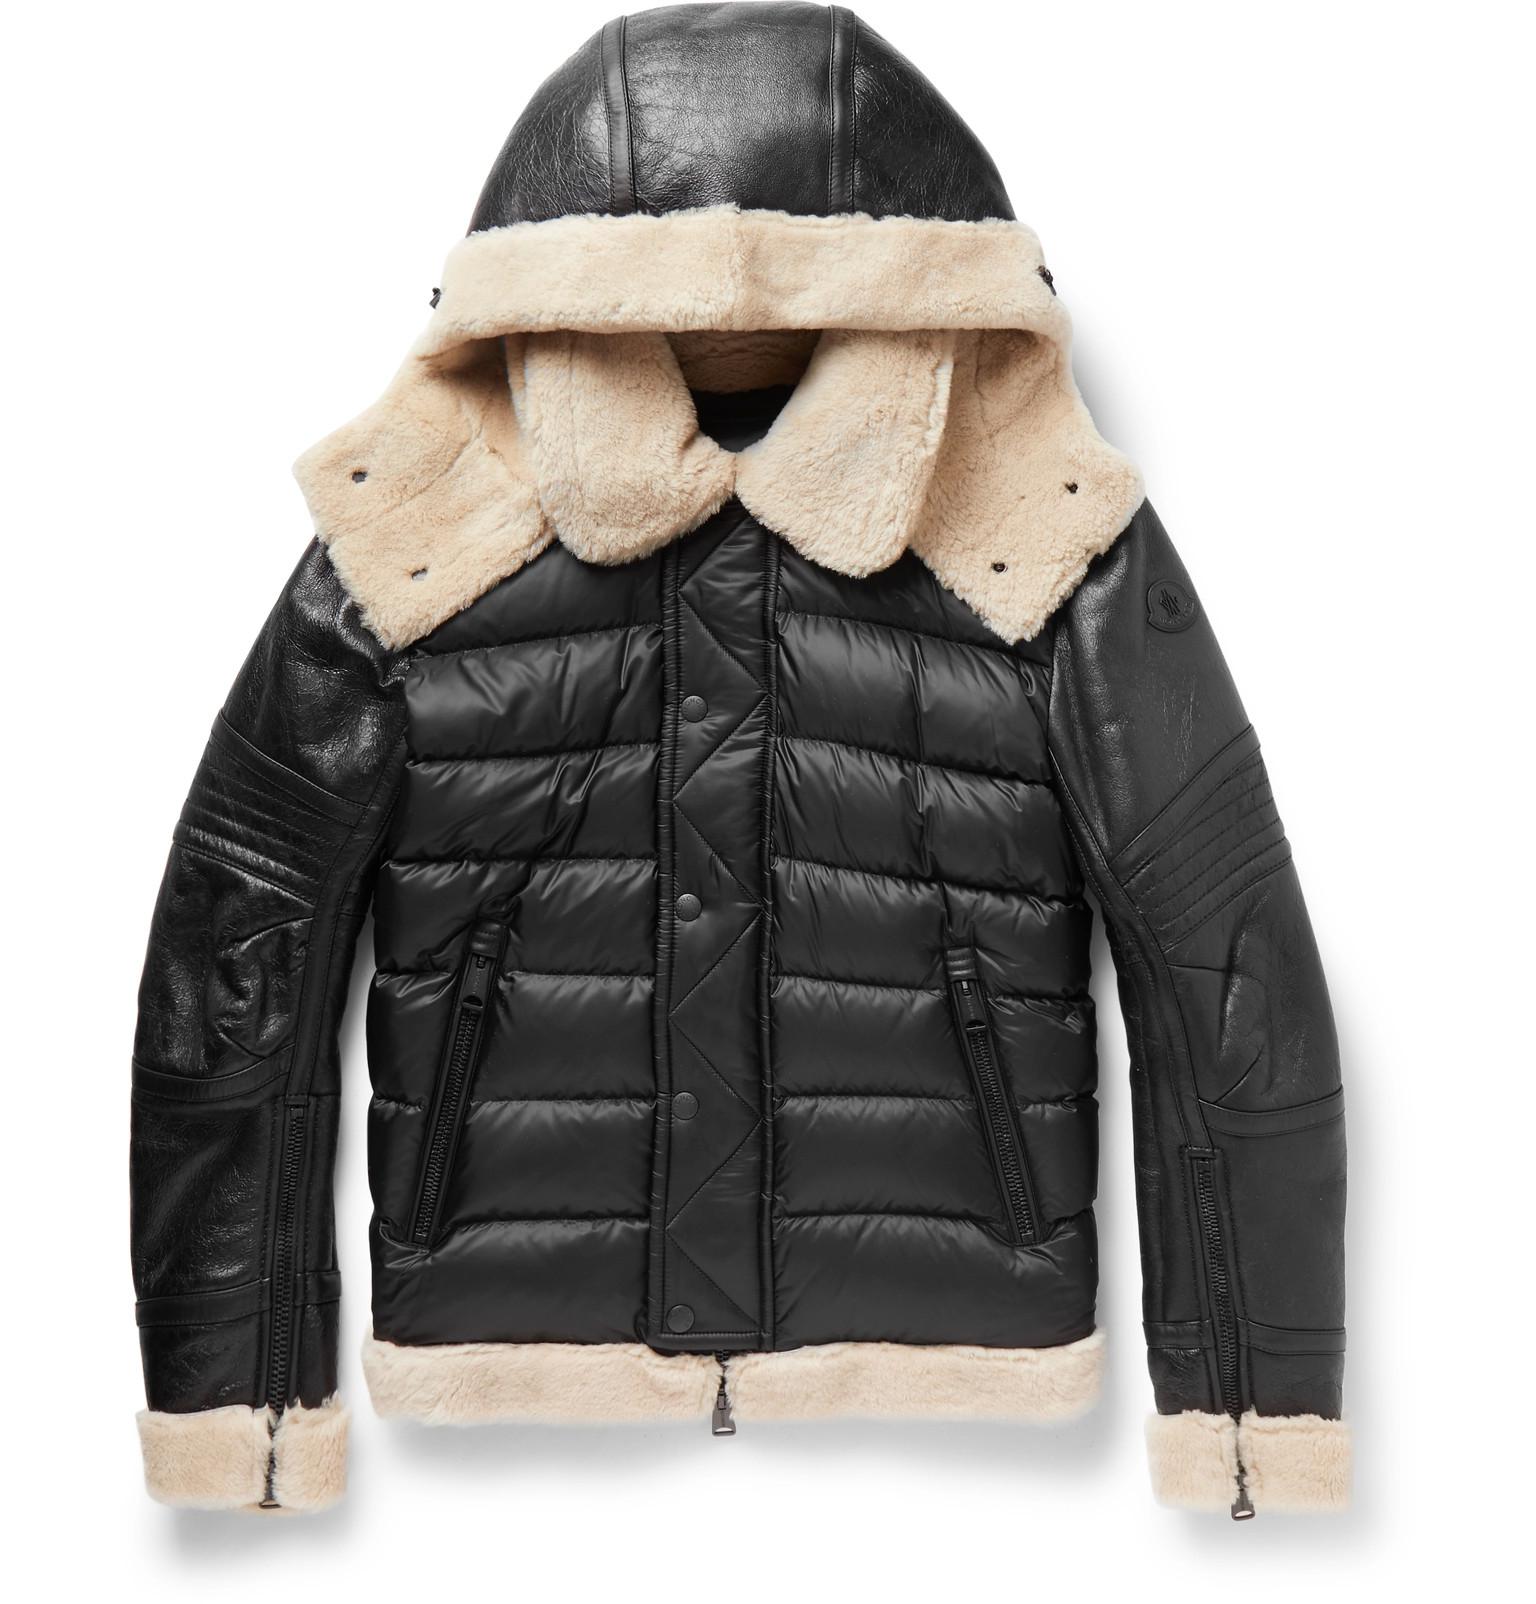 Moncler Shearling Jacket Sale, 60% OFF | www.chine-magazine.com